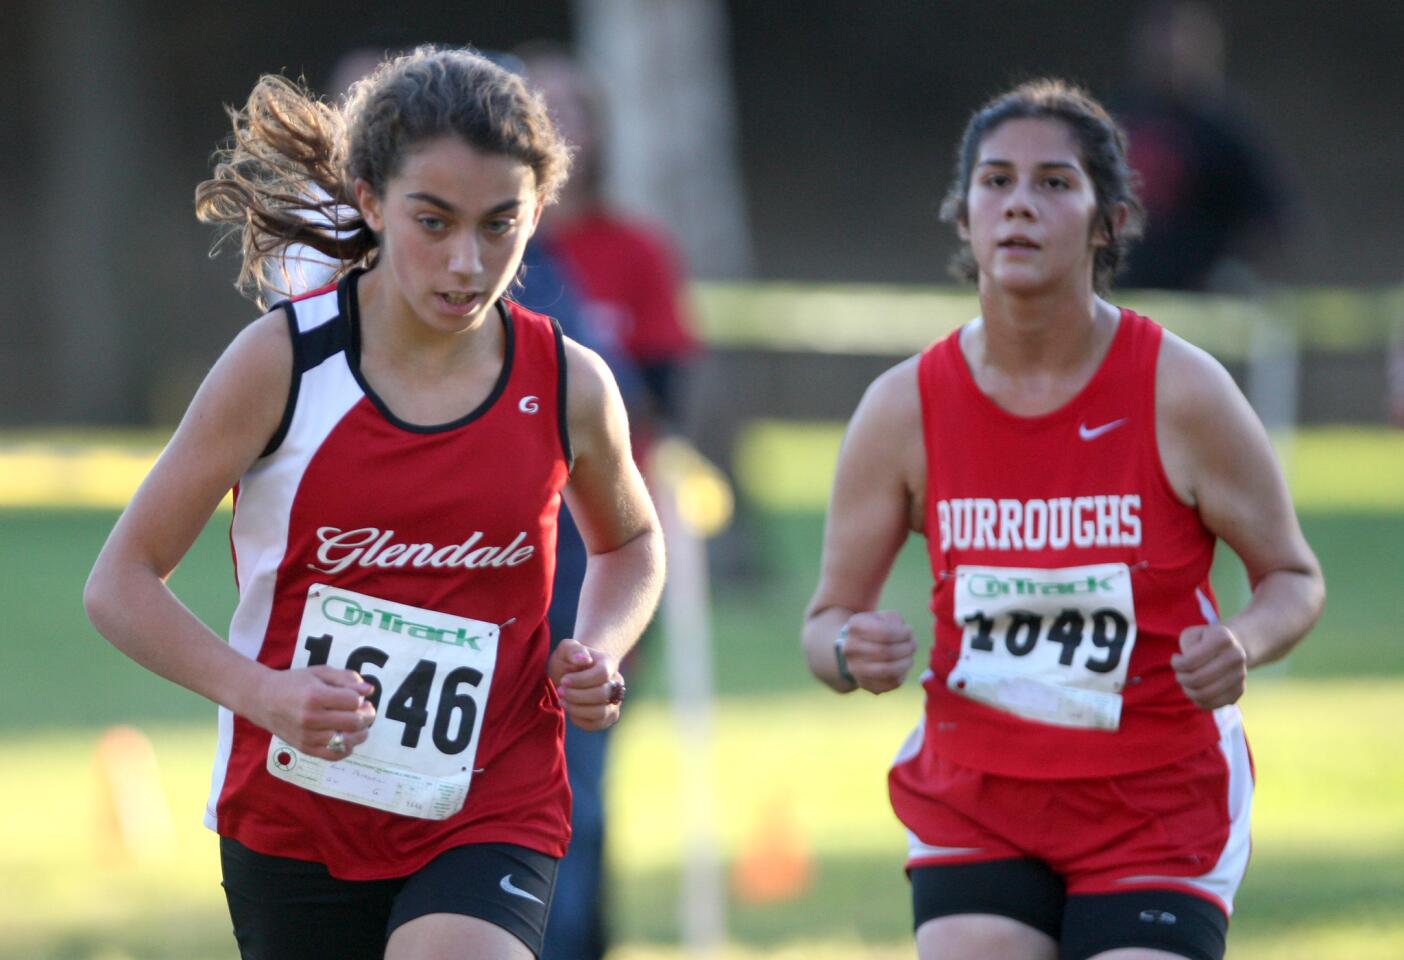 Photo Gallery: Pacific League cross country finals at Arcadia County Park